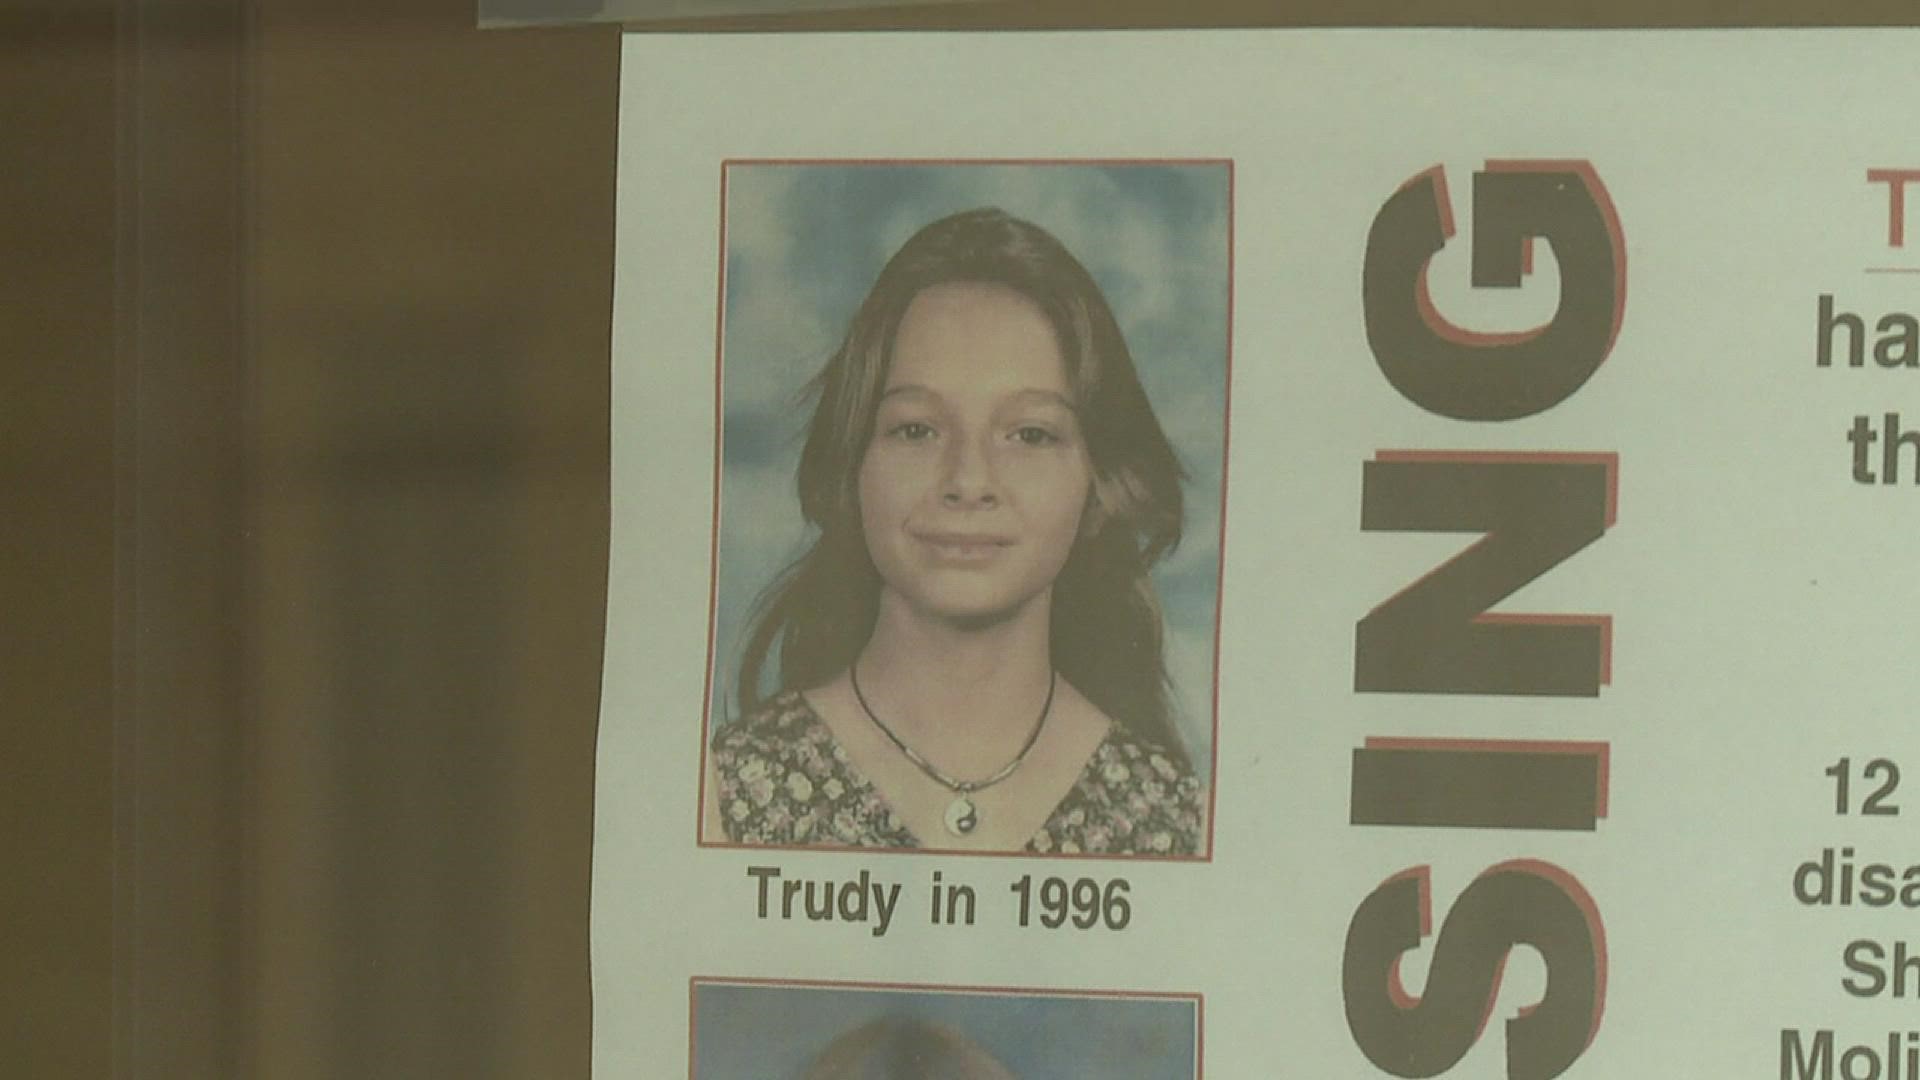 It's been a quarter of a century since the 11-year-old went missing from her home in Moline. Today, her loved ones say they'll never stop searching and hoping.